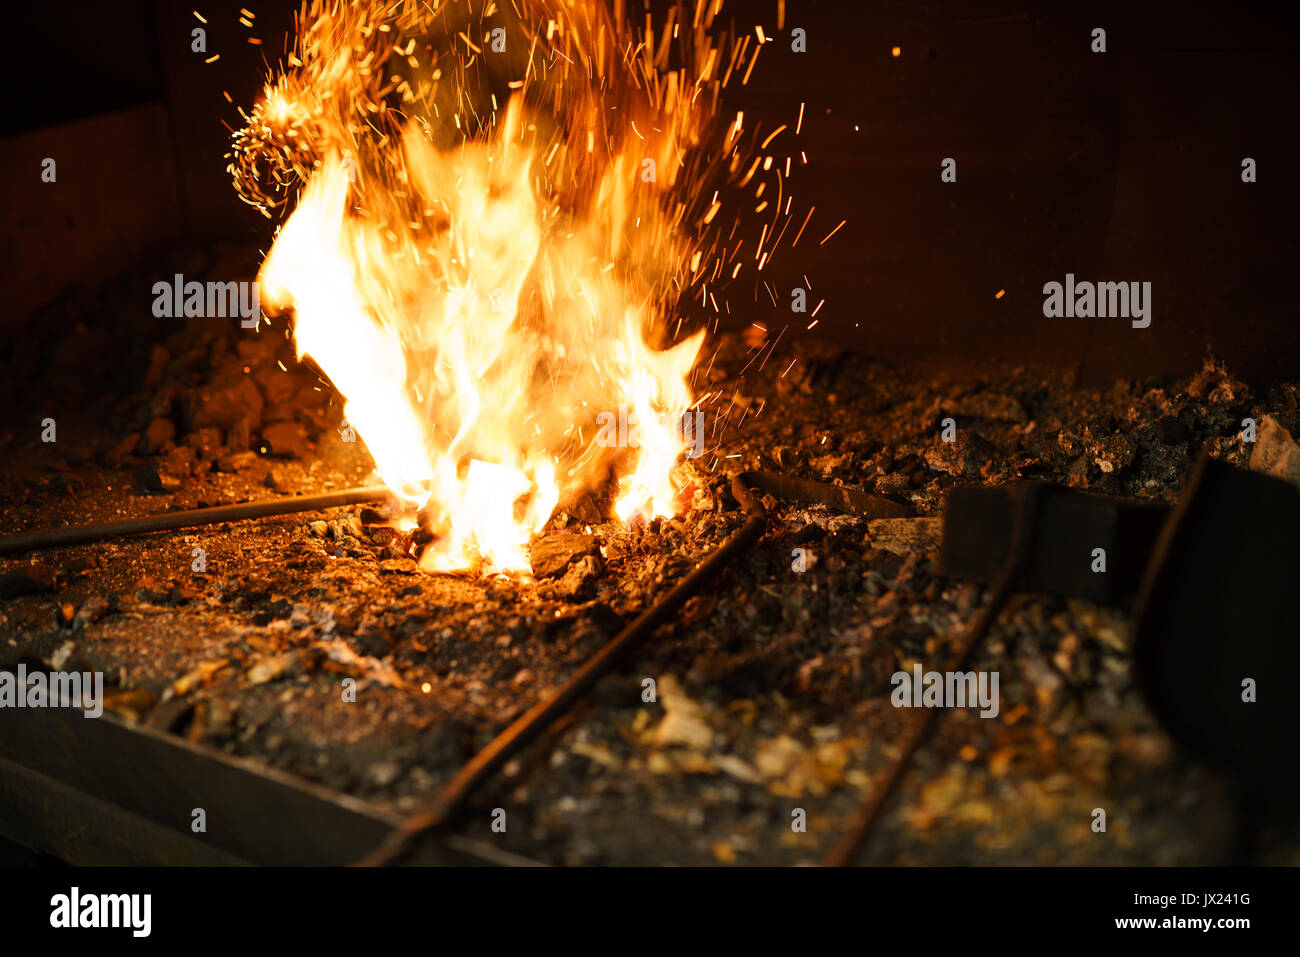 Blacksmith oven fire in workshop for metal heating Stock Photo